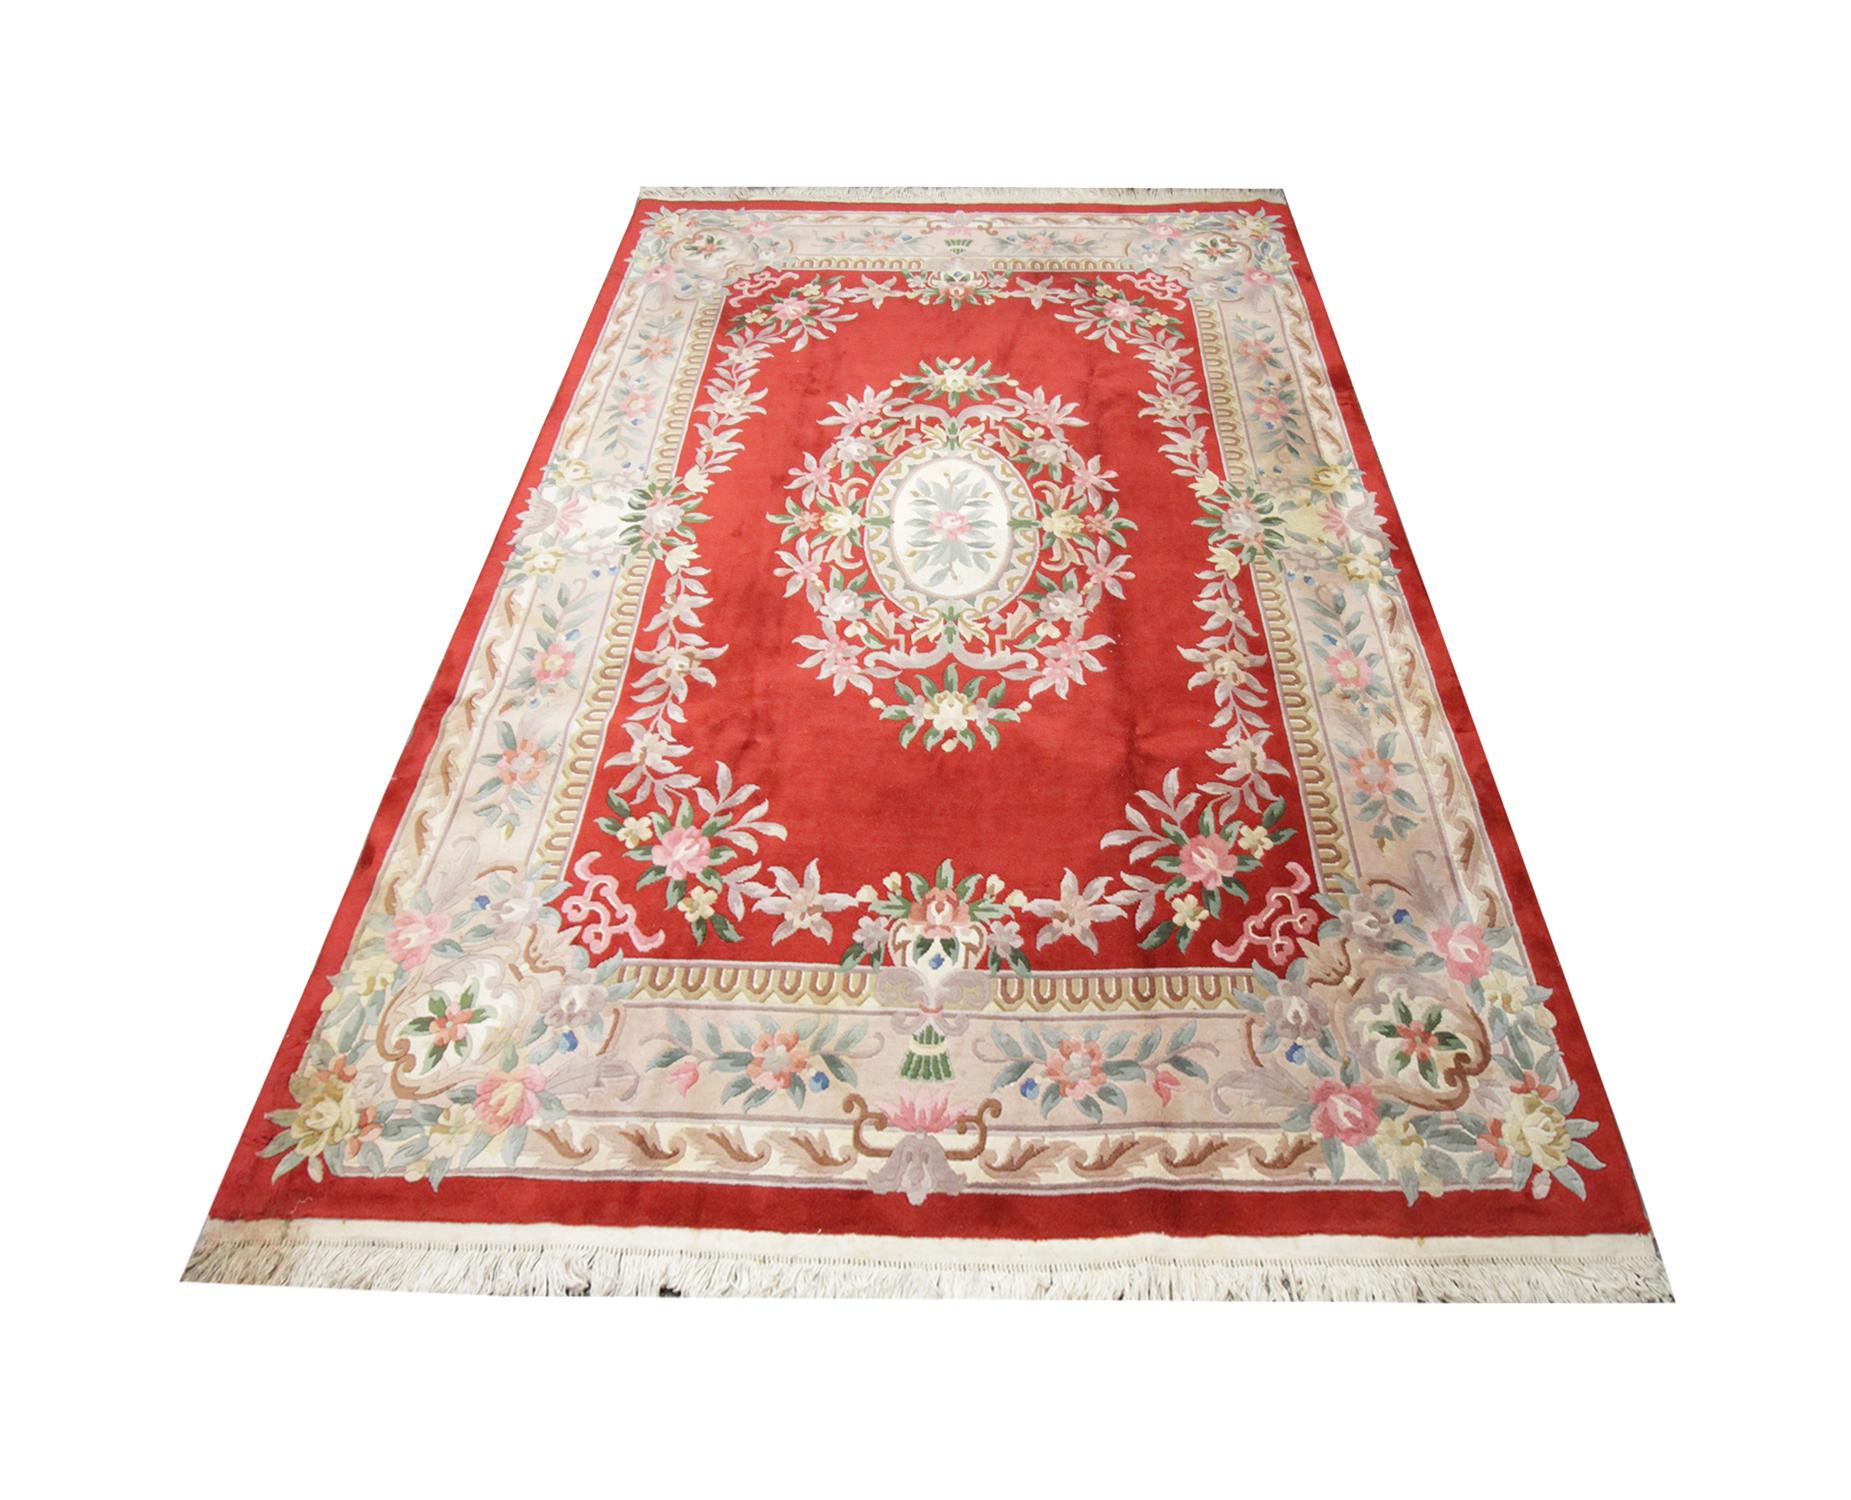 This handmade carpet traditional vintage handwoven Chinese area rug has been handwoven to perfection with a meandering floral border supported on a beige linear background. The central design is a beautiful intricate floral bouquet which sits on a